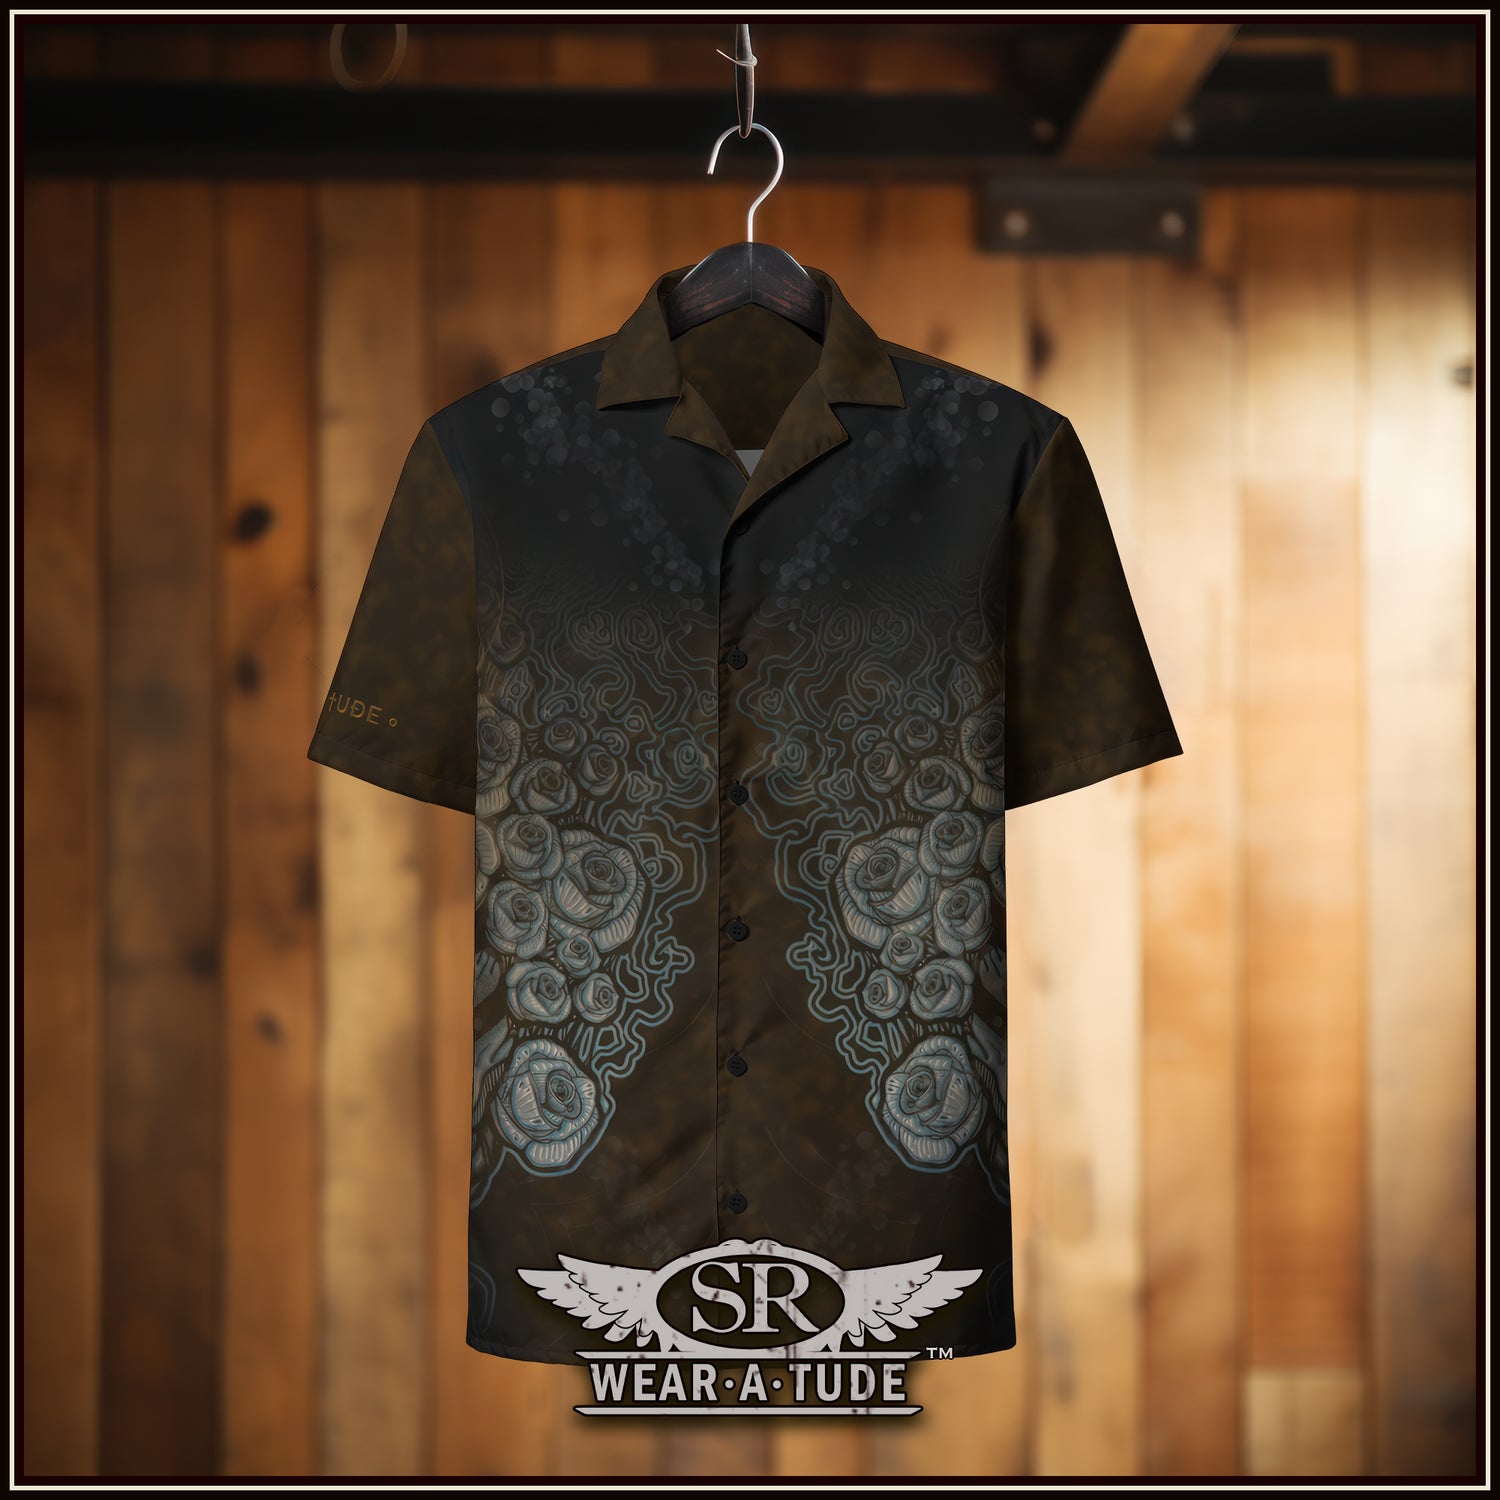 Feeling a bit Rock and a bit Country? We gave your flavour covered at SR Wear Atude. Our signature style of line roses and skulls. 